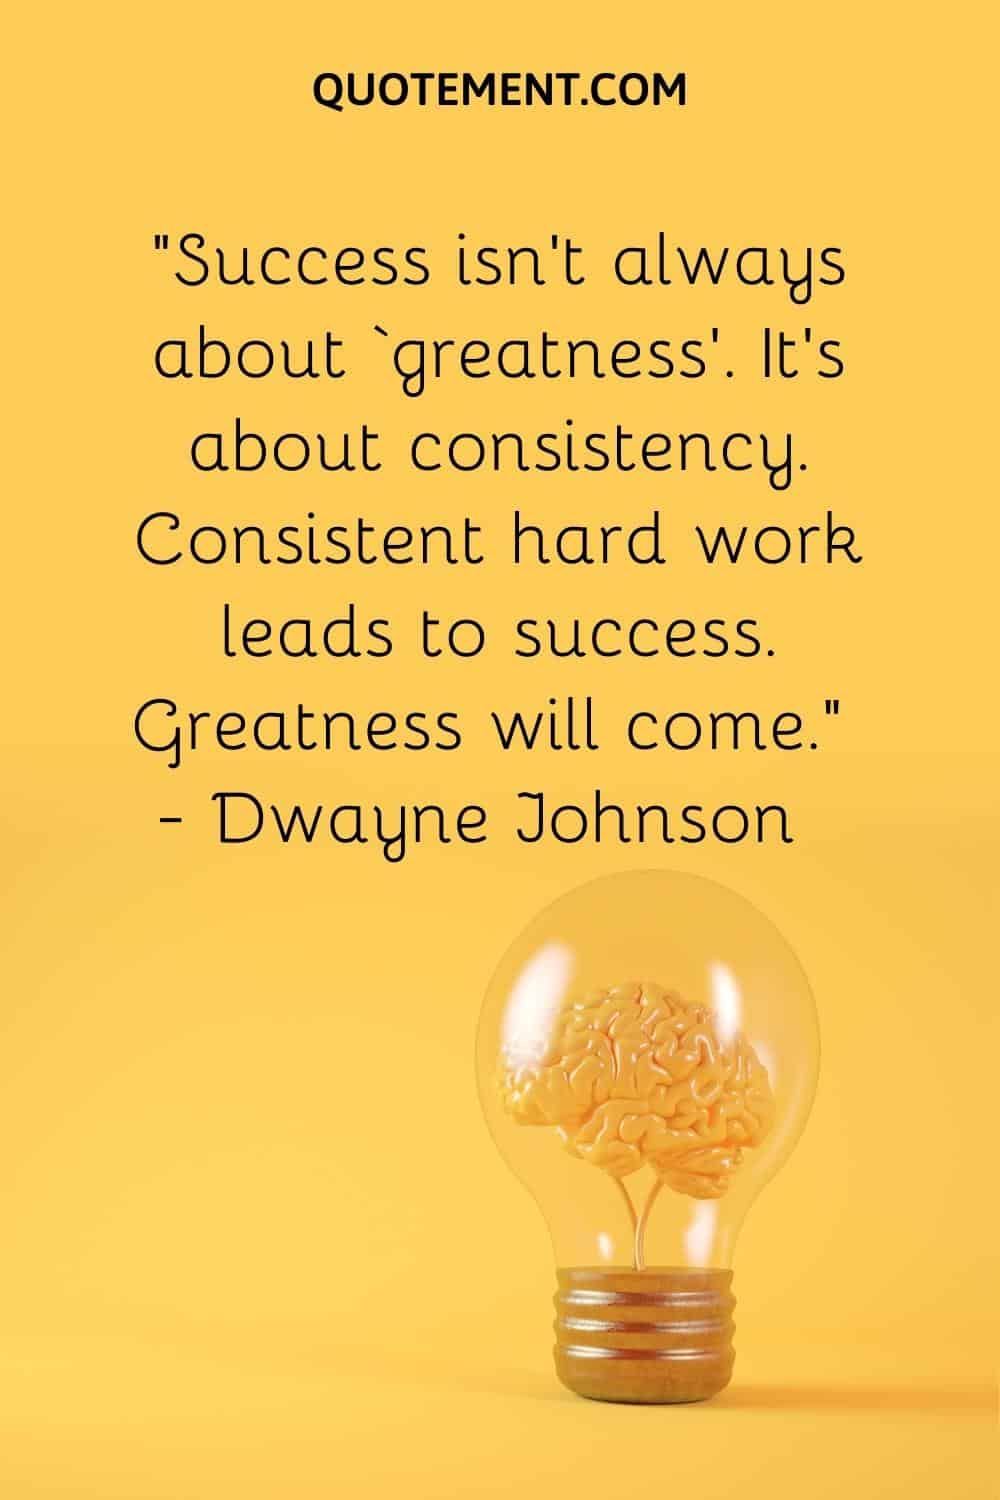 “Success isn’t always about ‘greatness’. It’s about consistency. Consistent hard work leads to success. Greatness will come.” — Dwayne Johnson